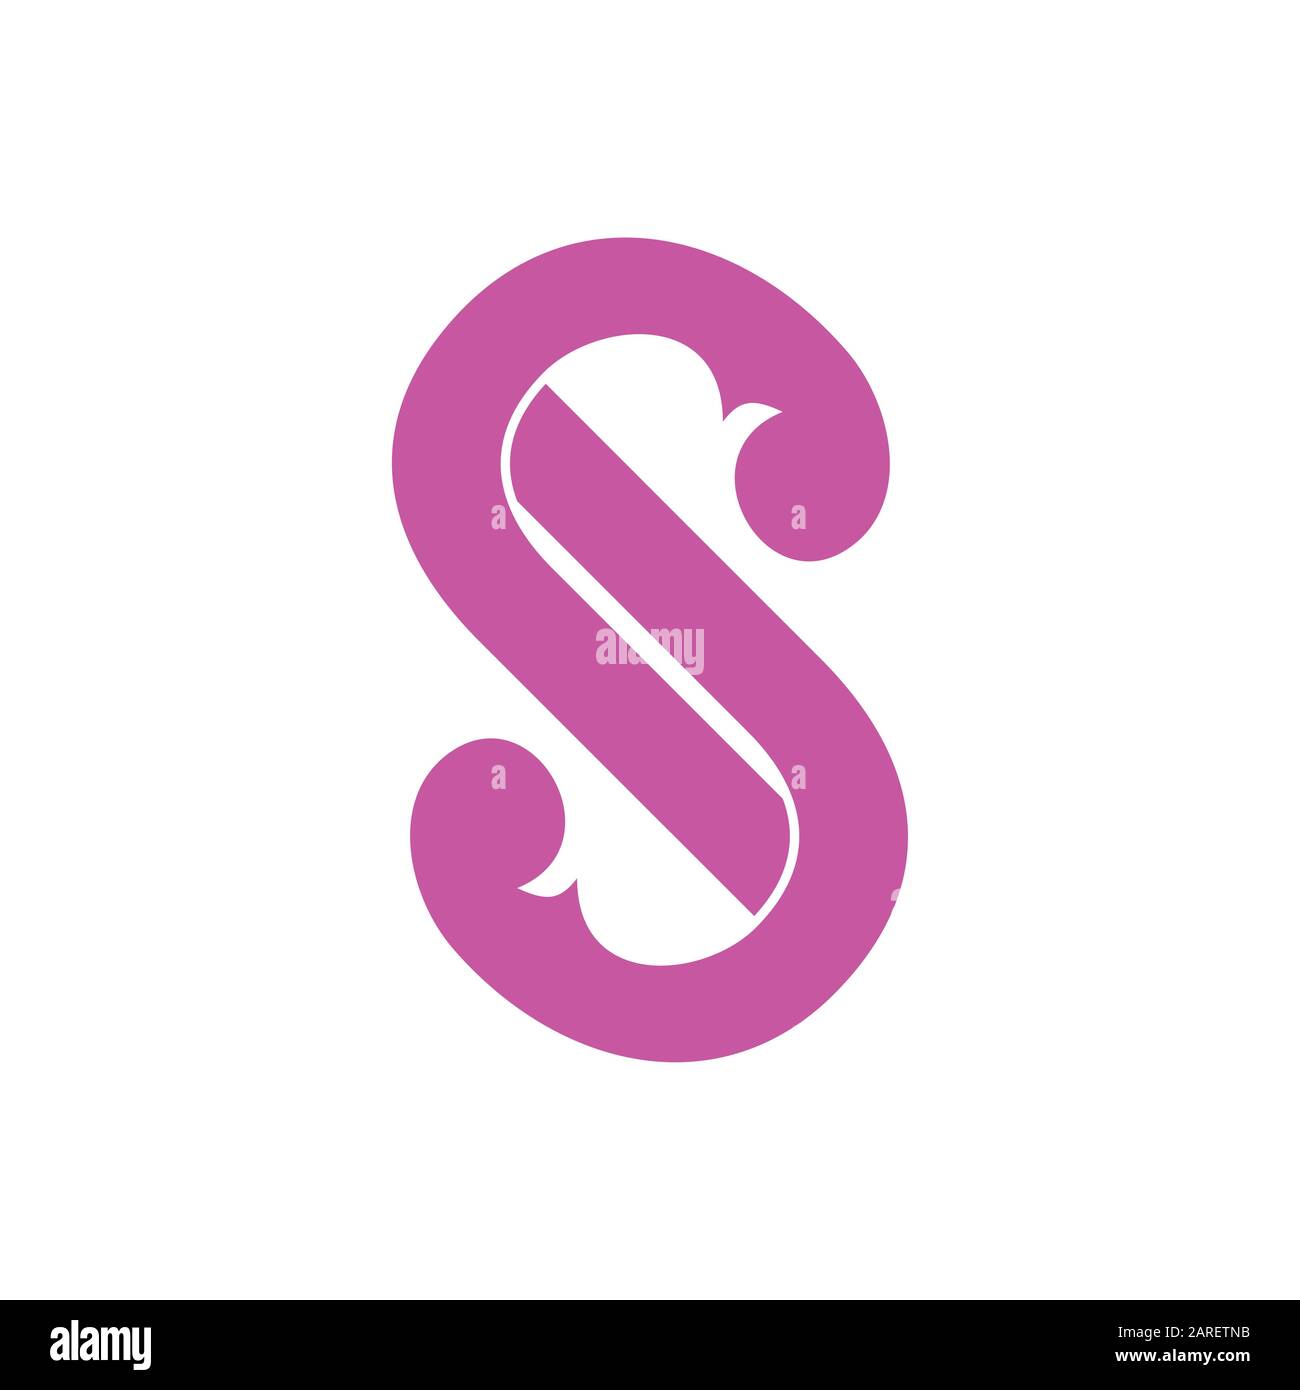 abstract letters sj linked logo vector Stock Vector